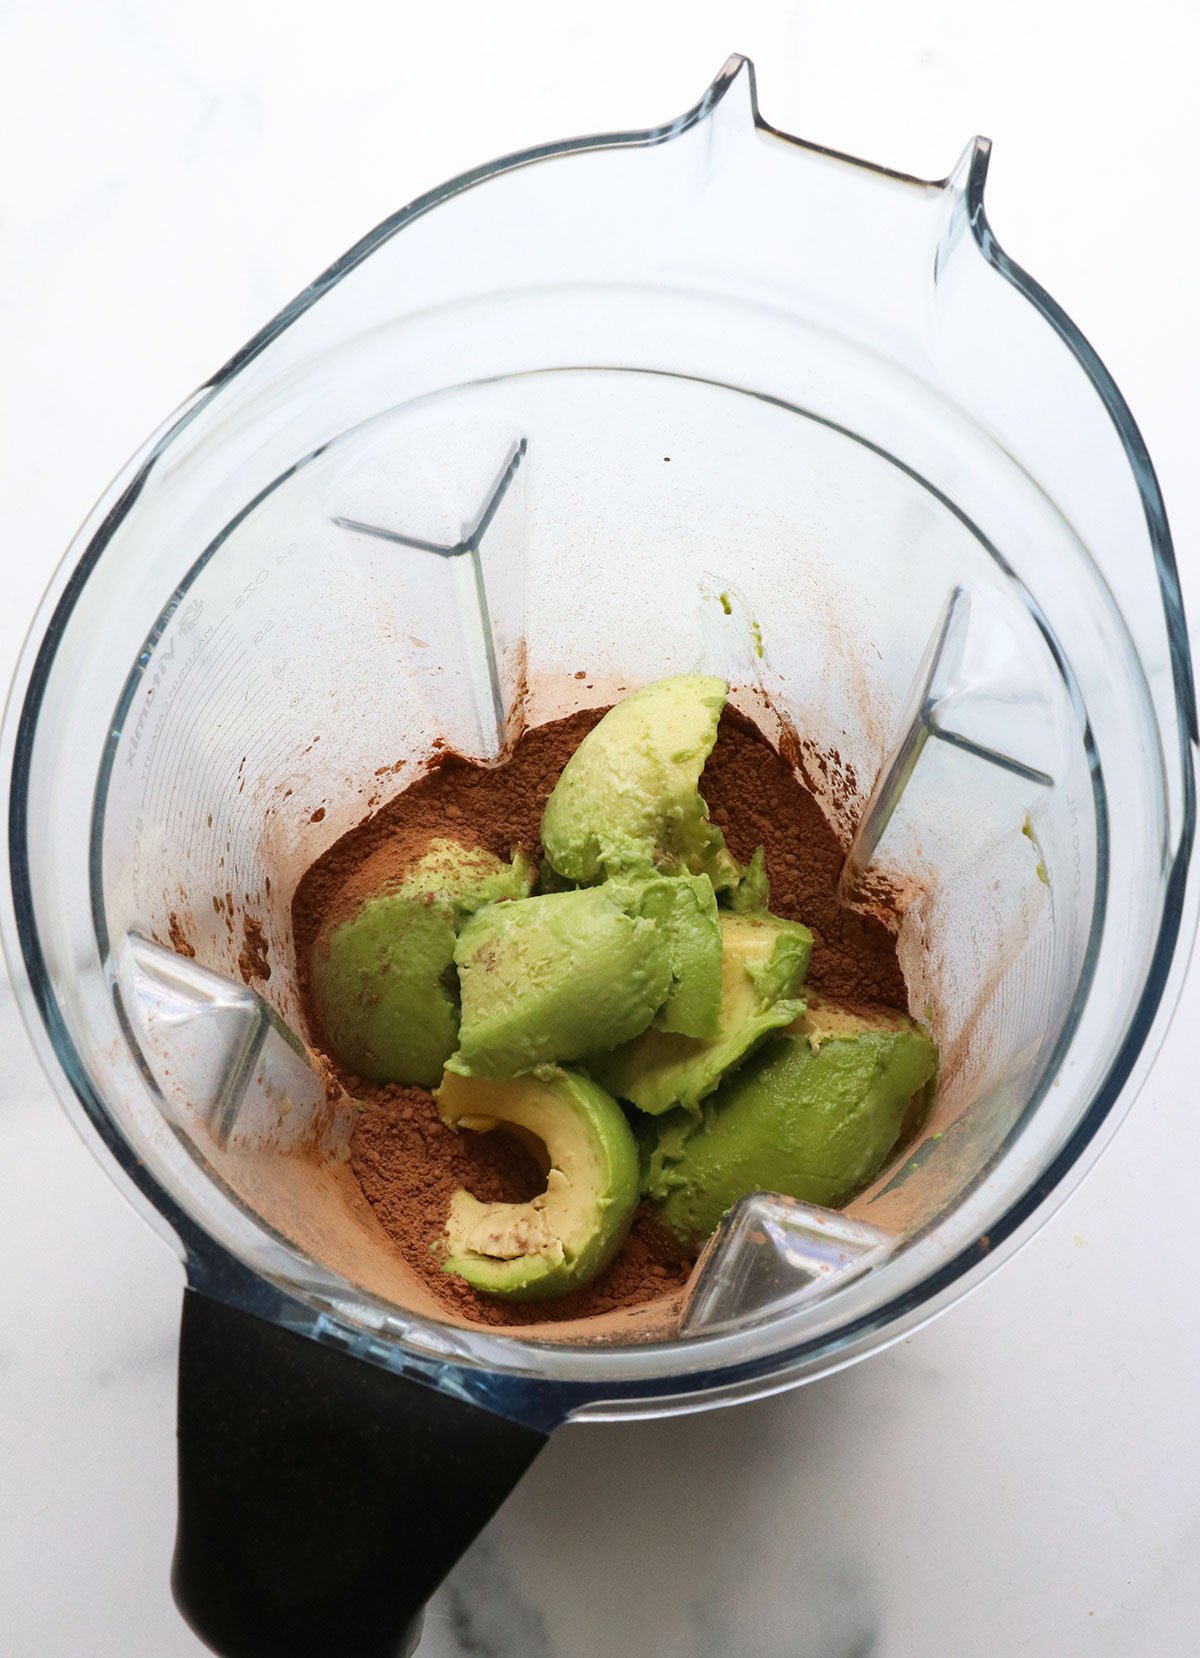 avocado and cocoa powder in a blender.